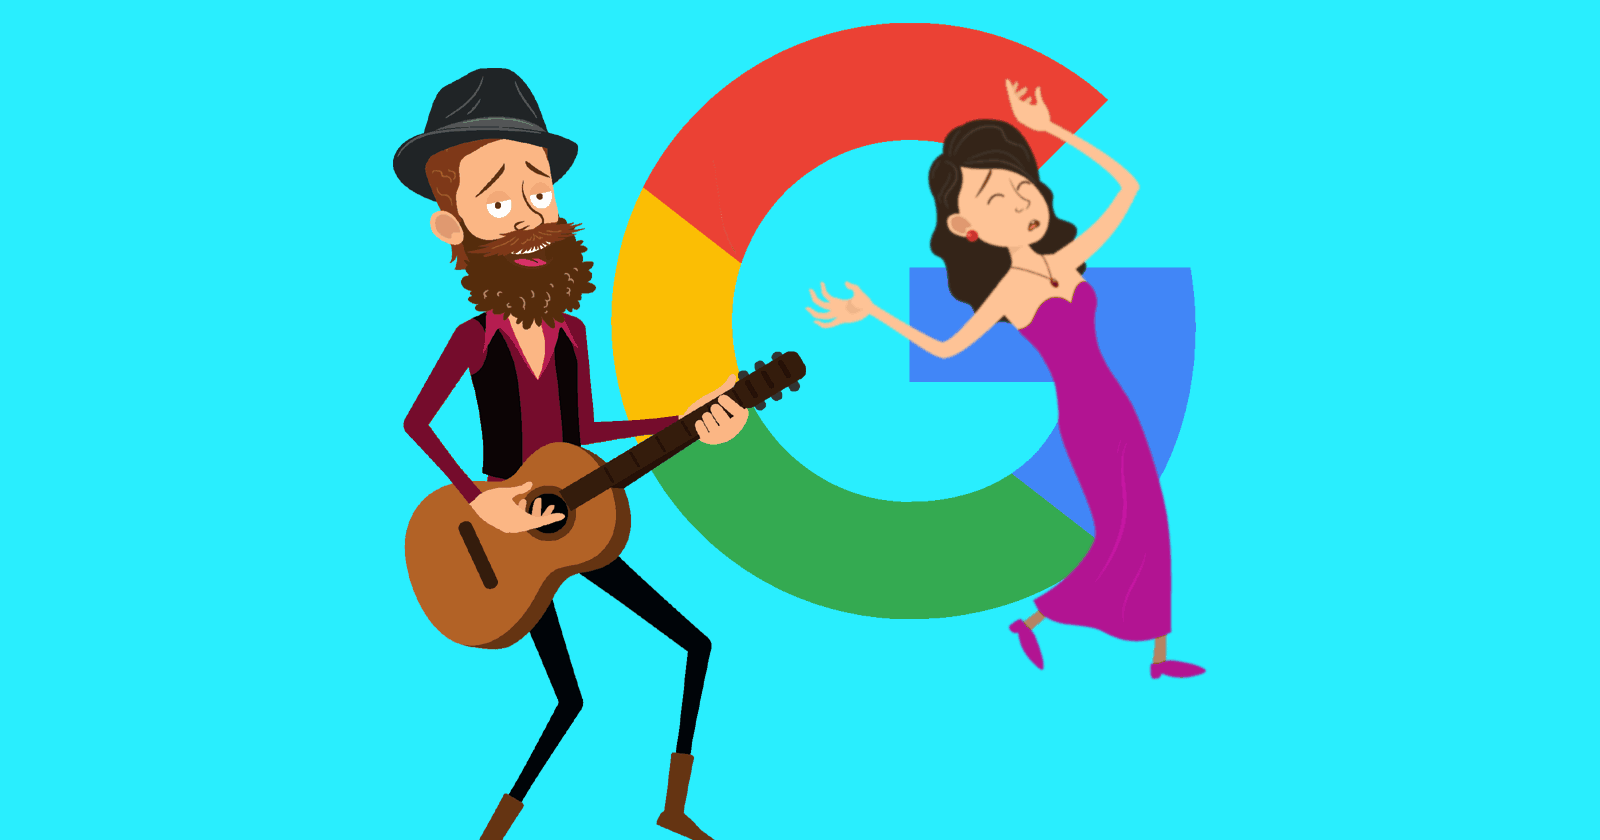 Google logo behind a busker, symbolic of a web publisher, singing to a woman representing Google who is swooning